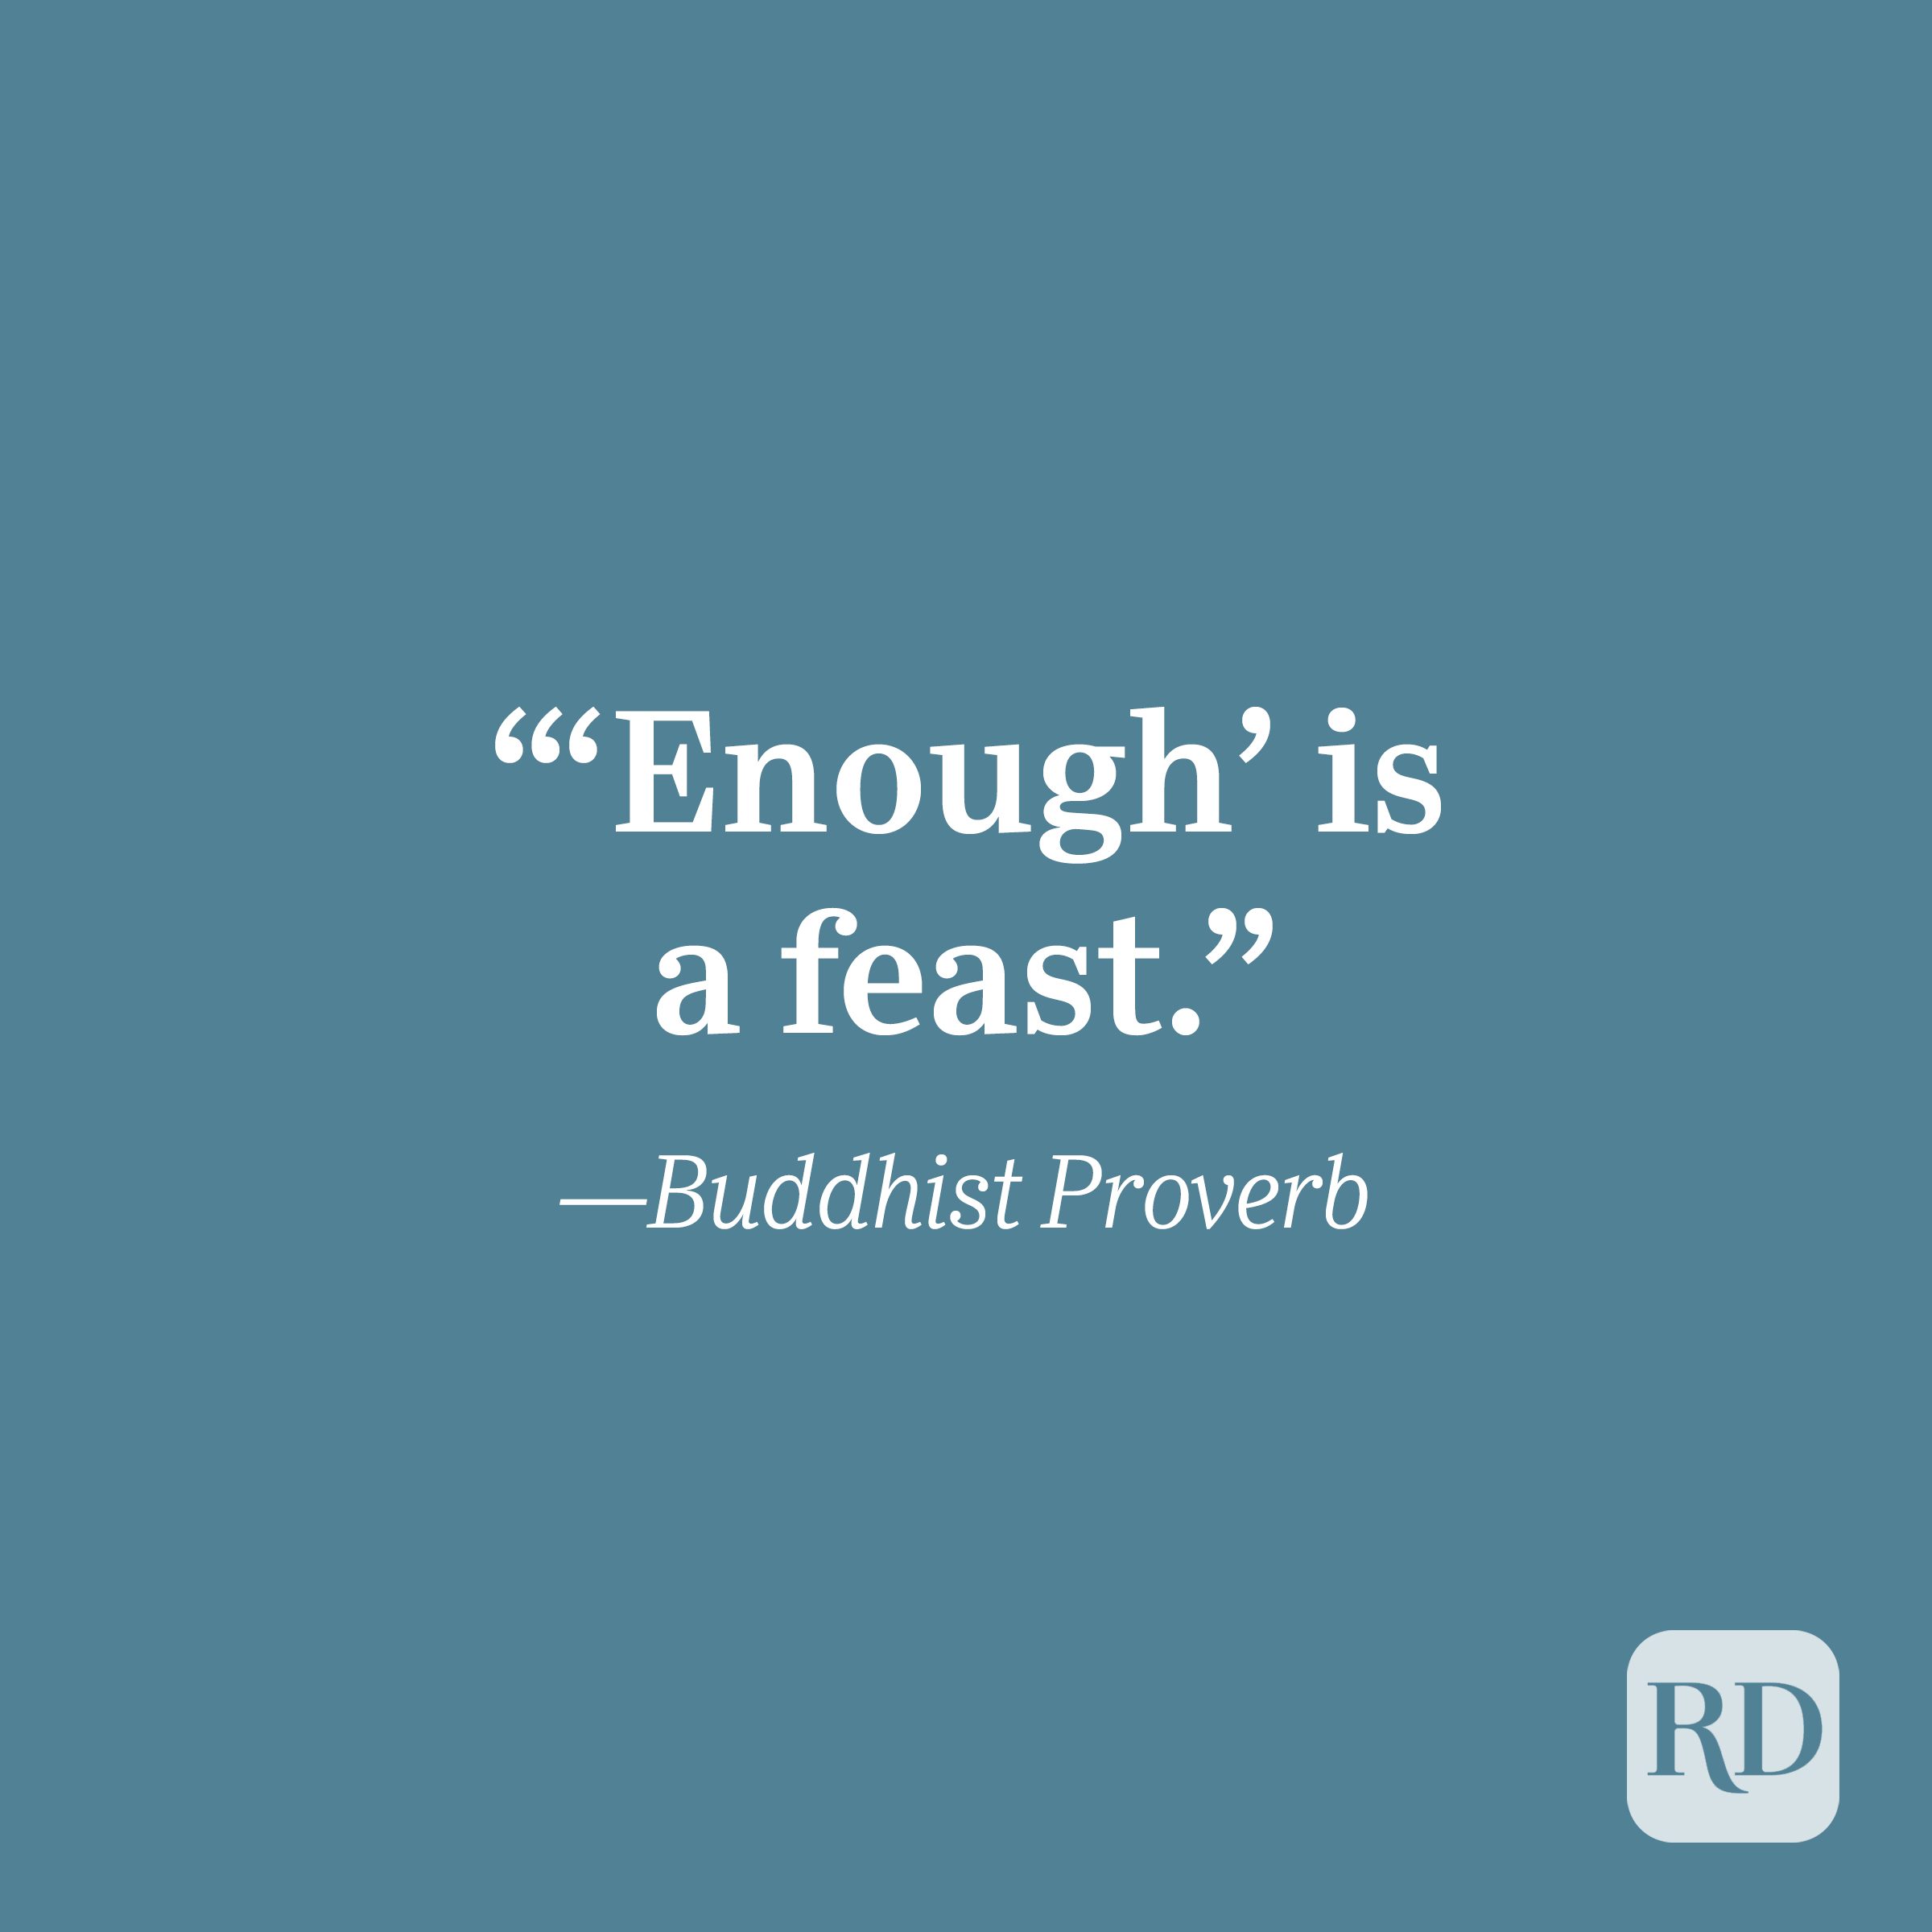 Buddhist Proverb quote about gratitude.